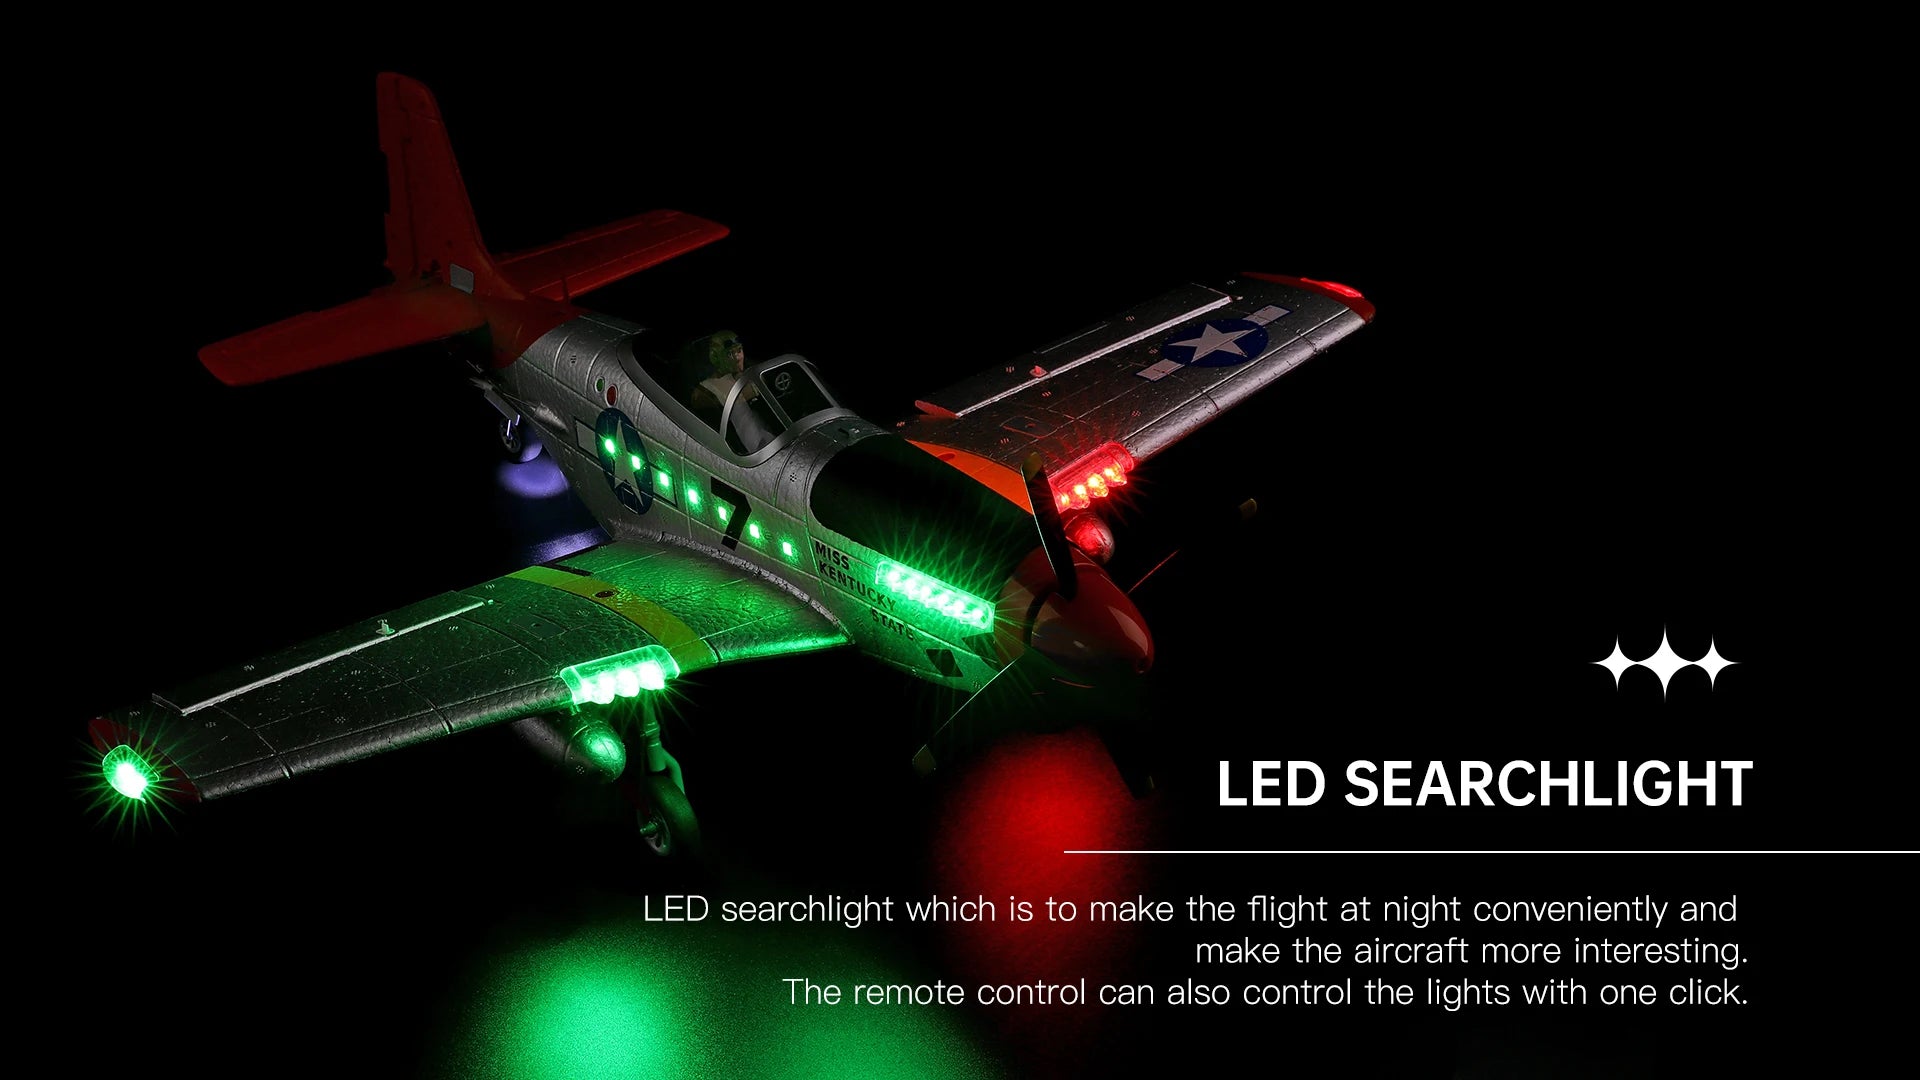 WLtoys A280 Brushless Motor RC Airplane, Ke LED SEARCHLIGHT LED searchlight which is to make the flight at night conveniently and